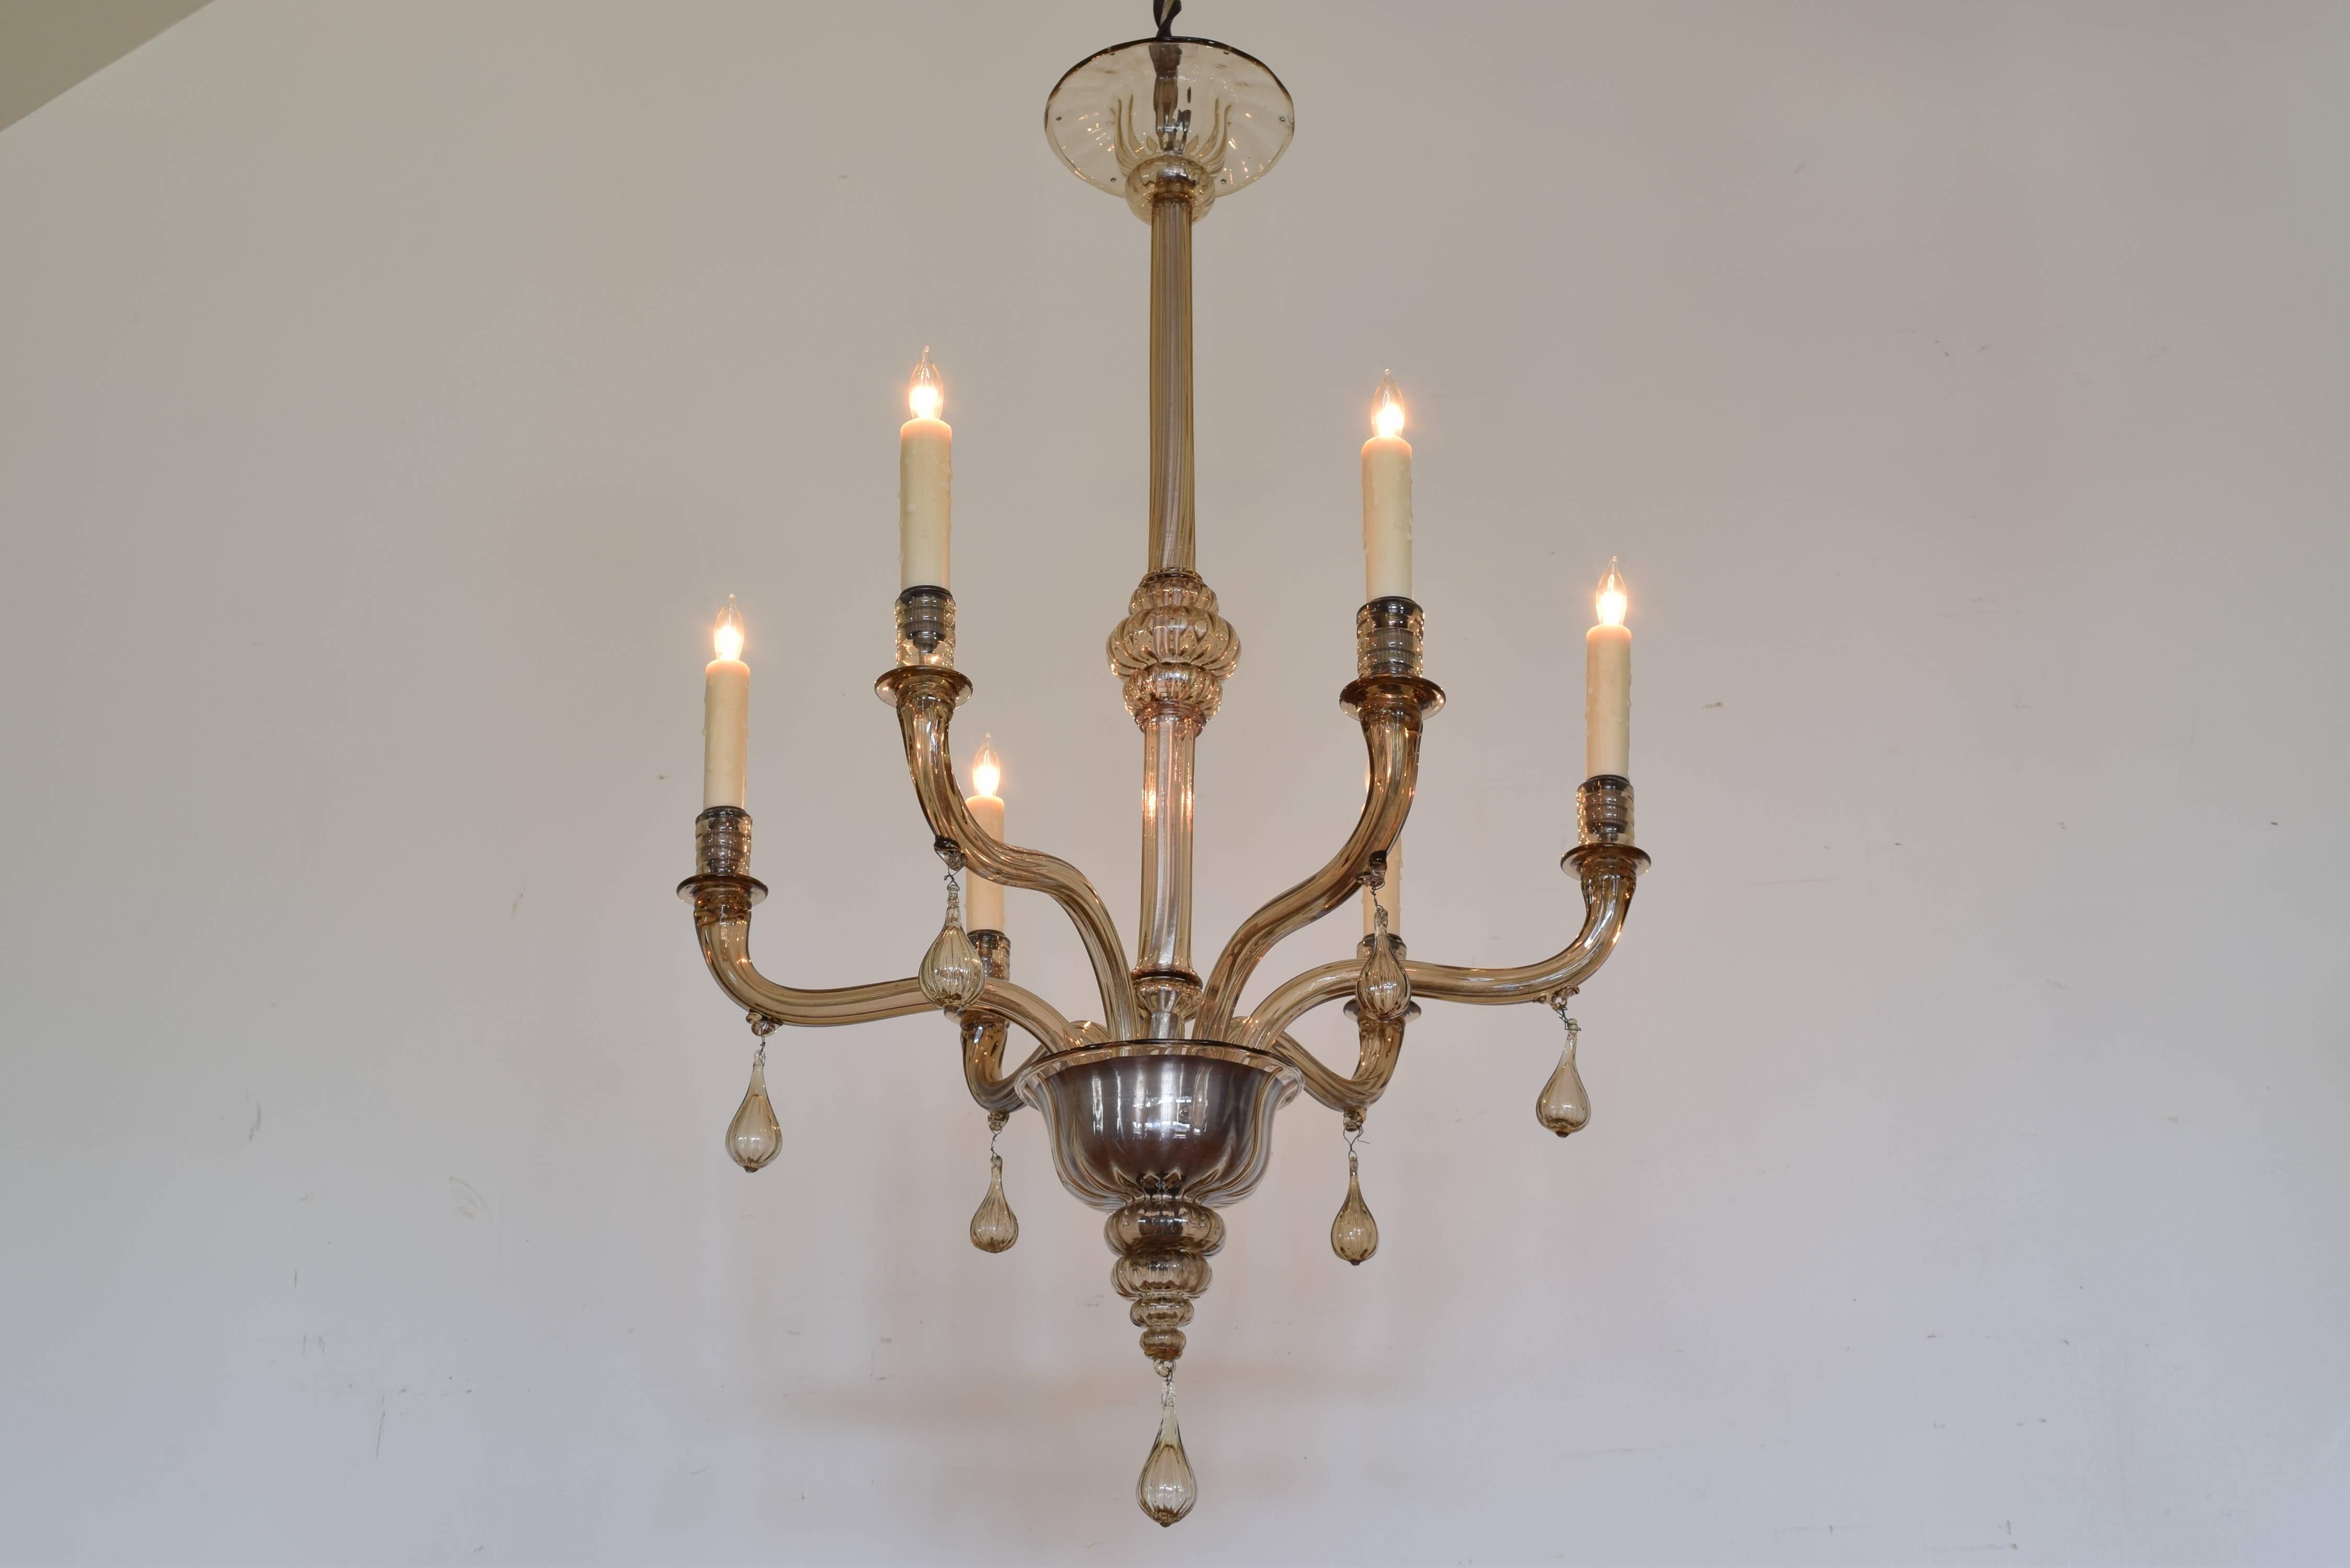 Italian Murano blown glass six-light chandelier, the top portion consisting of three pieces: the crown, the elongated center section with a bulbous base, and a lower section with a smaller bulbous, having six graceful arms with hanging pendants